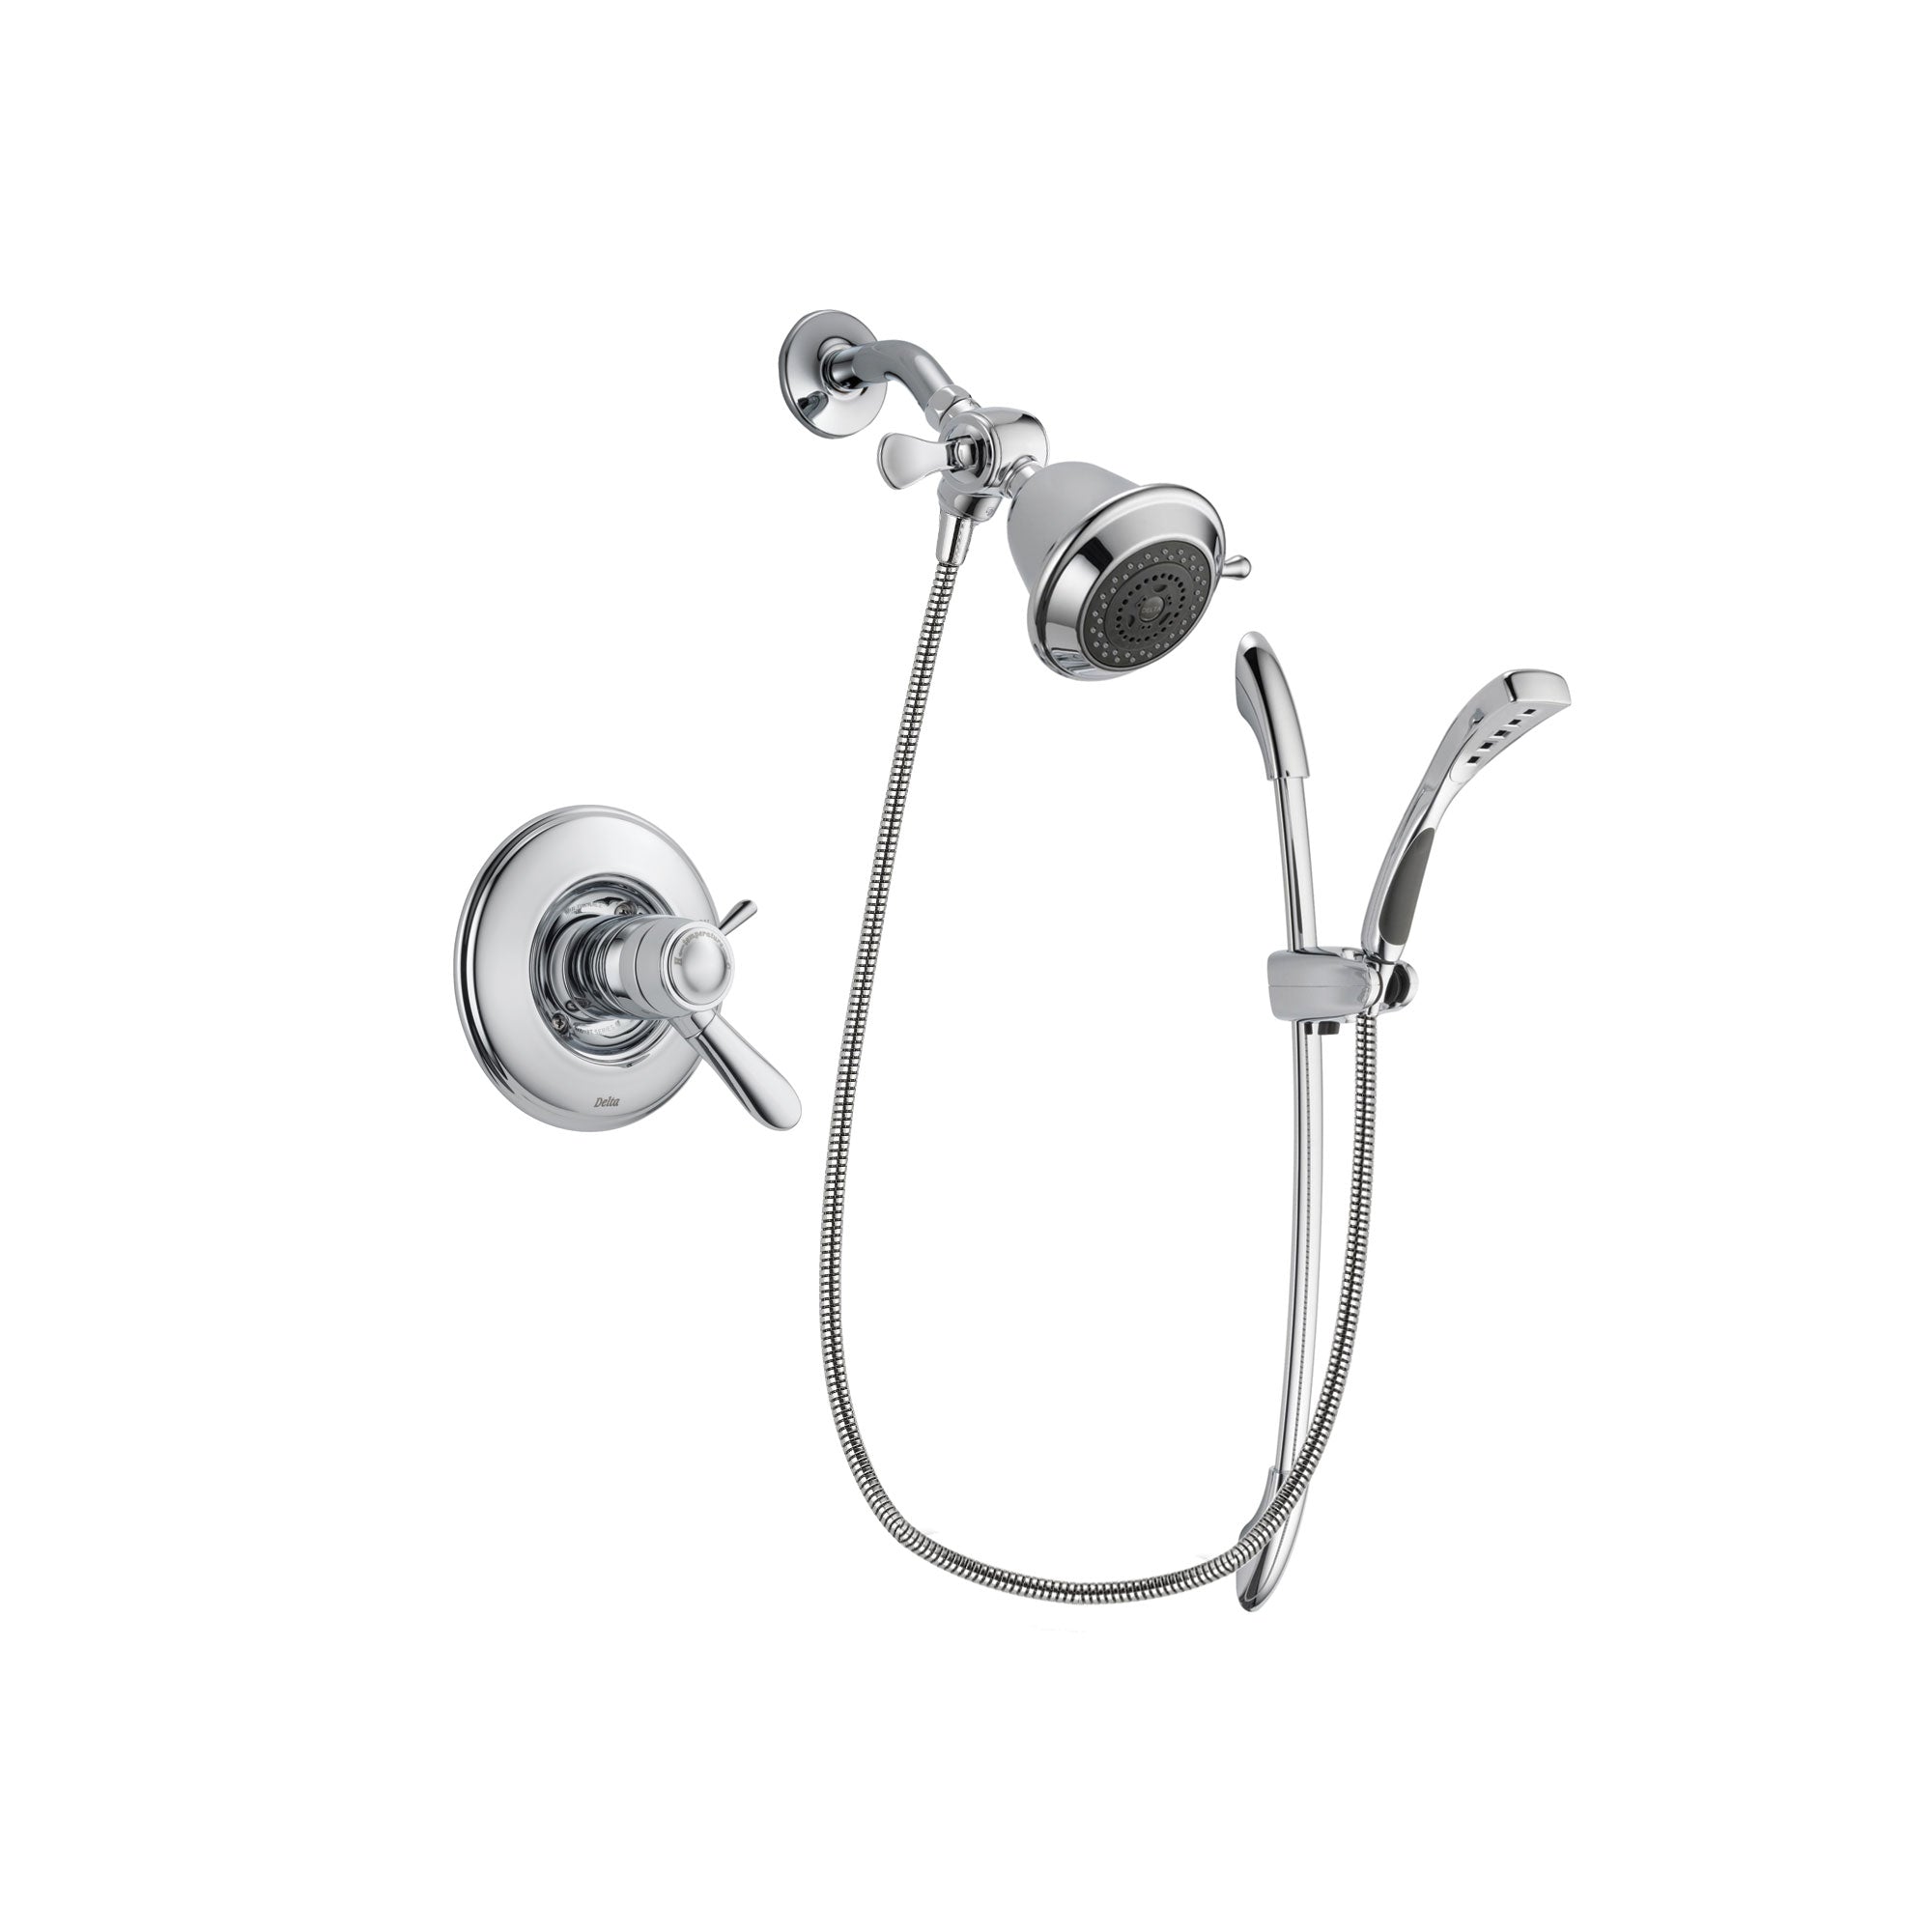 Delta Lahara Chrome Finish Thermostatic Shower Faucet System Package with Shower Head and Handheld Shower with Slide Bar Includes Rough-in Valve DSP0426V